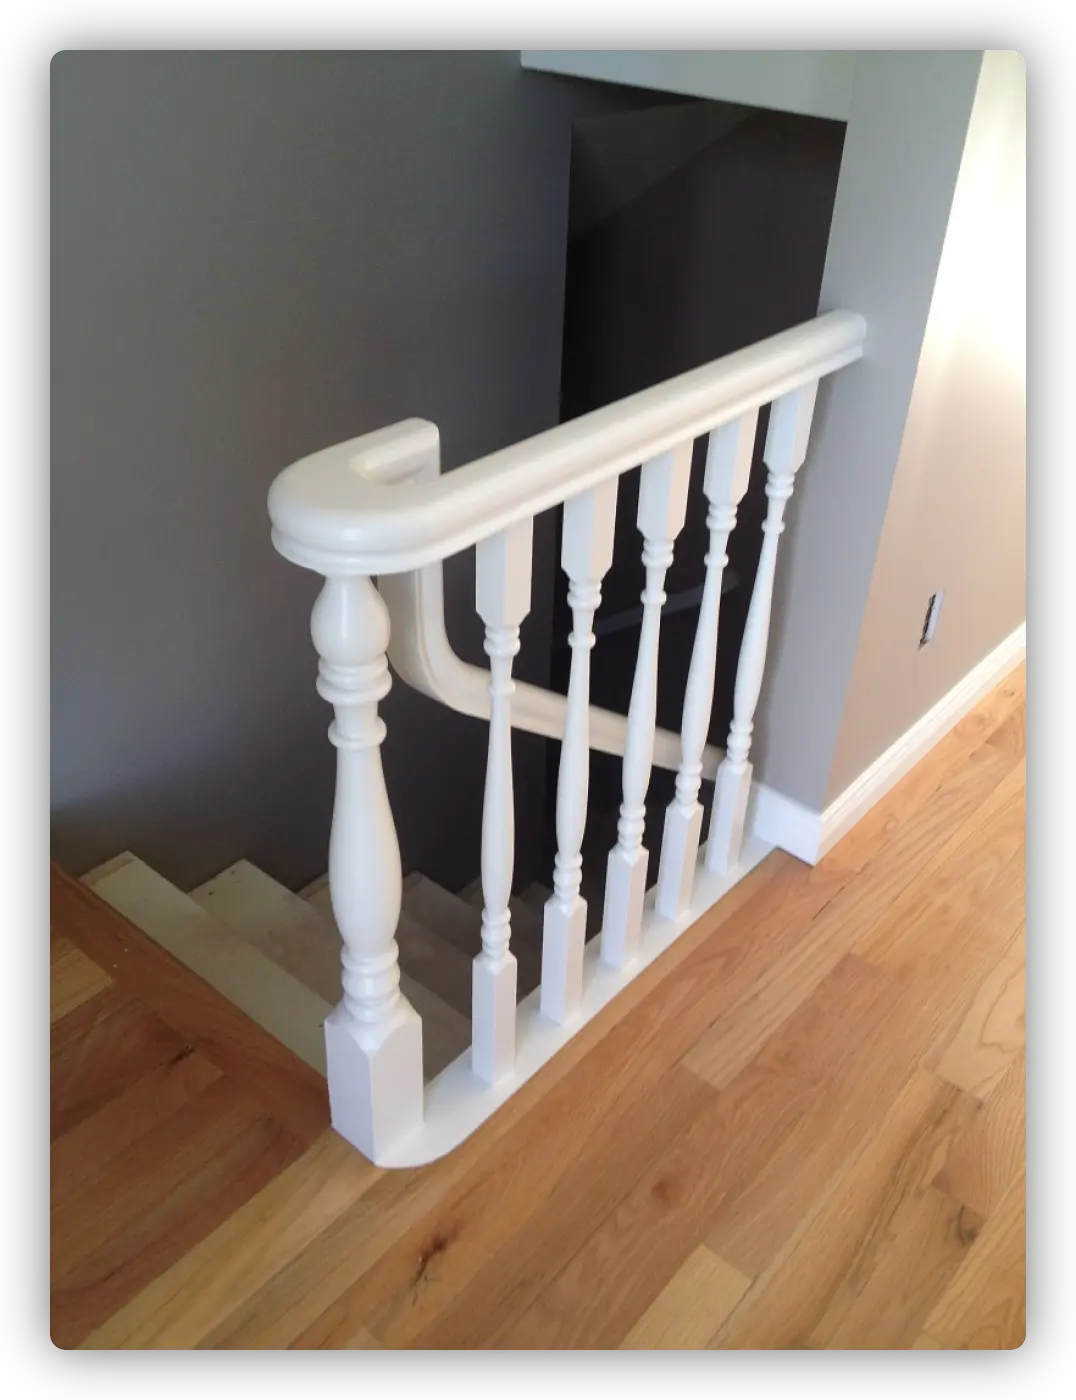 Painting railings after